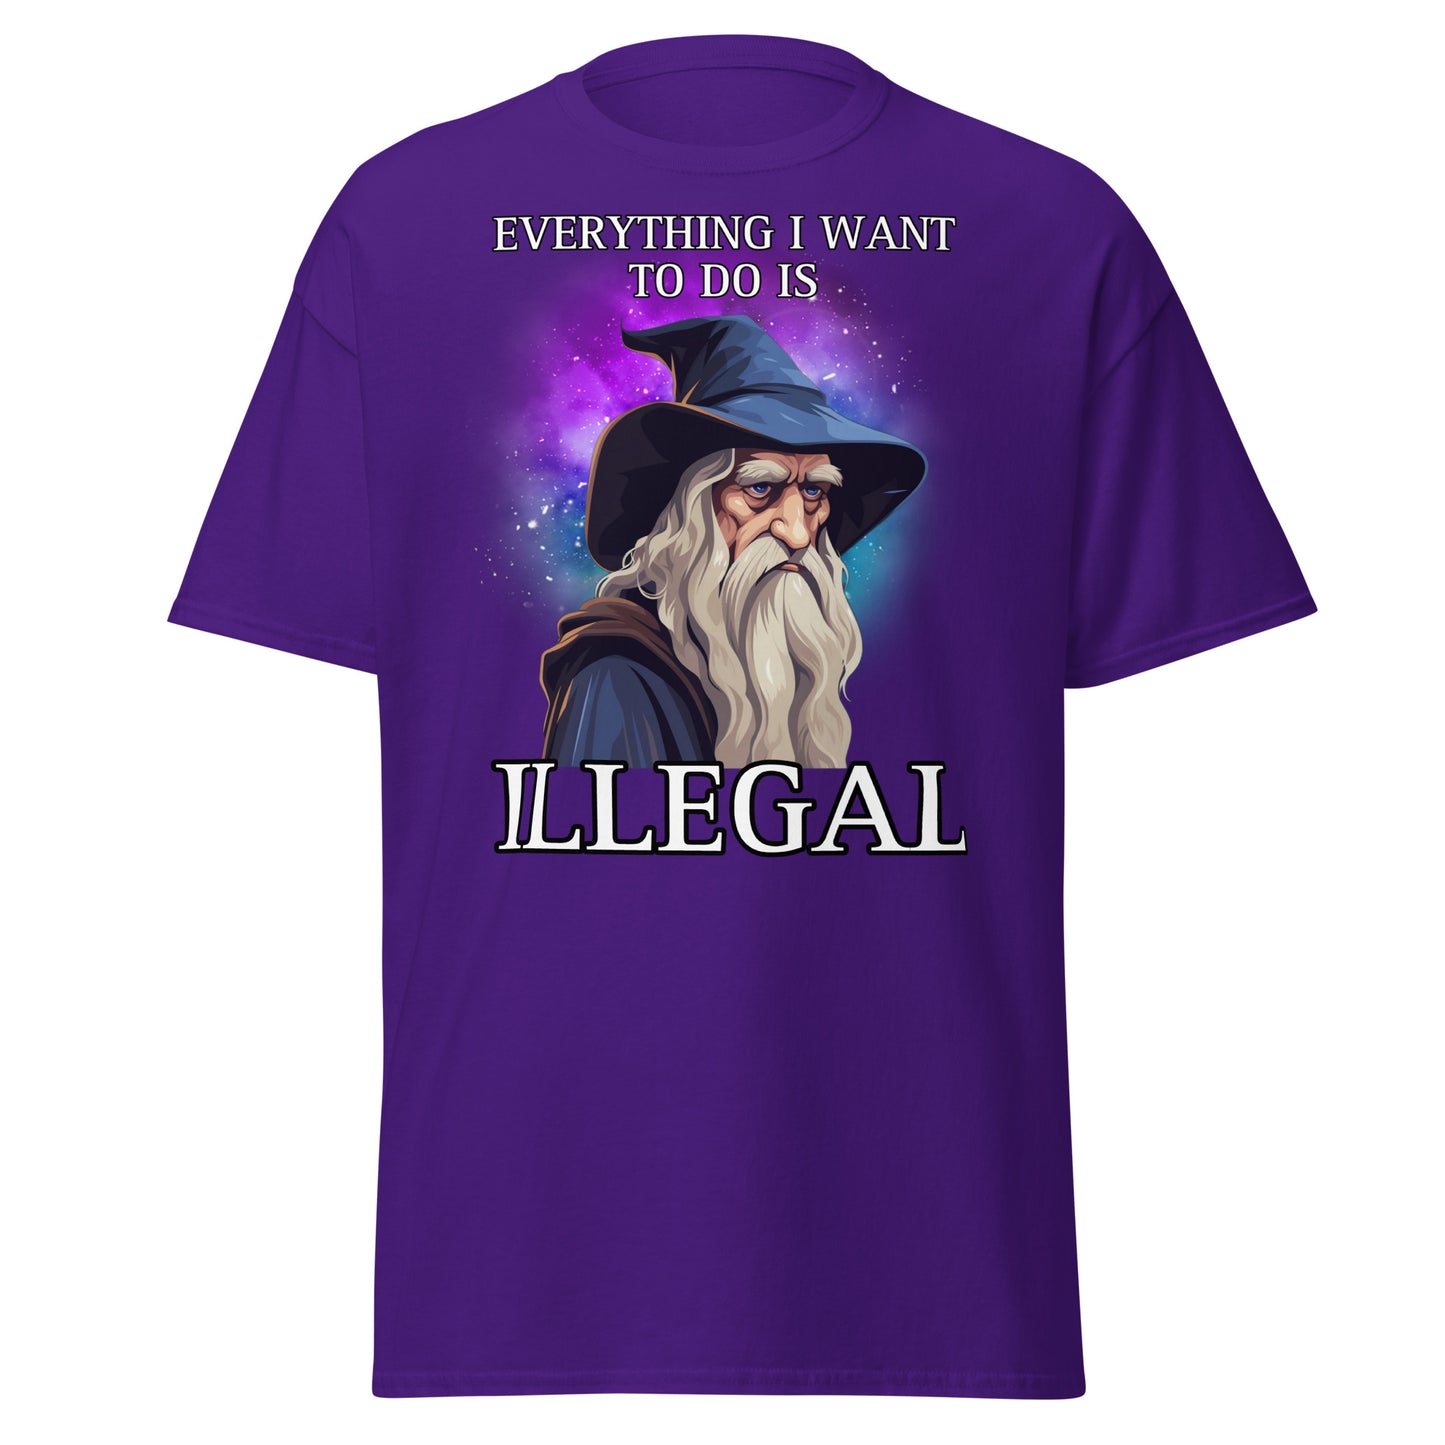 Everything I want to do is illegal